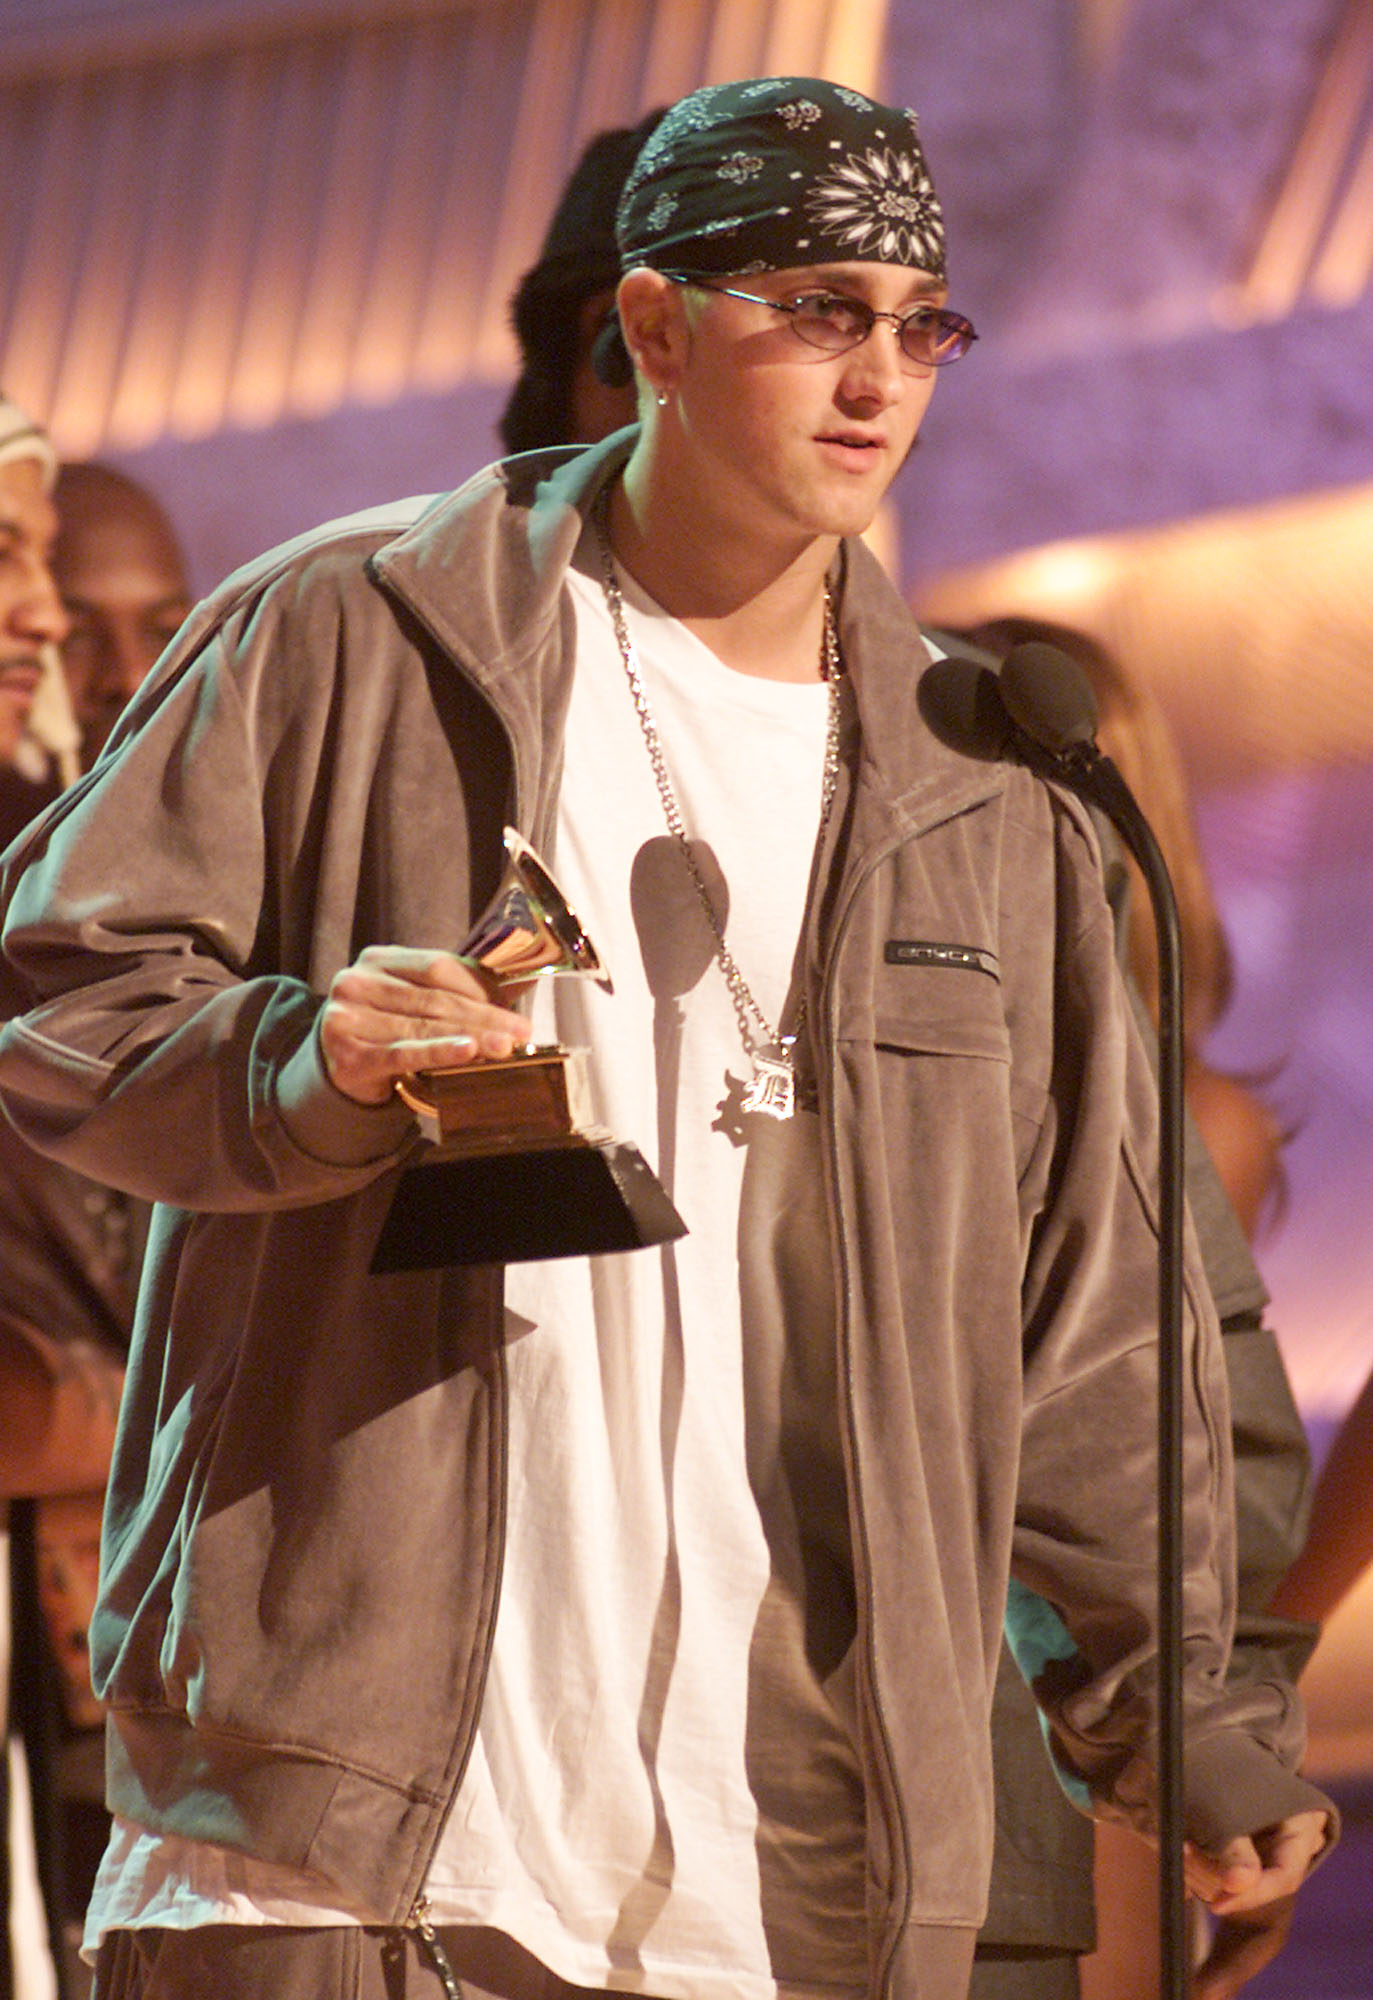 Eminem accepts a Grammy for Best Rap Album at the 43rd Annual Grammy Awards at Staples Center on February 21, 2001 in Los Angeles, California. | Source: Getty Images